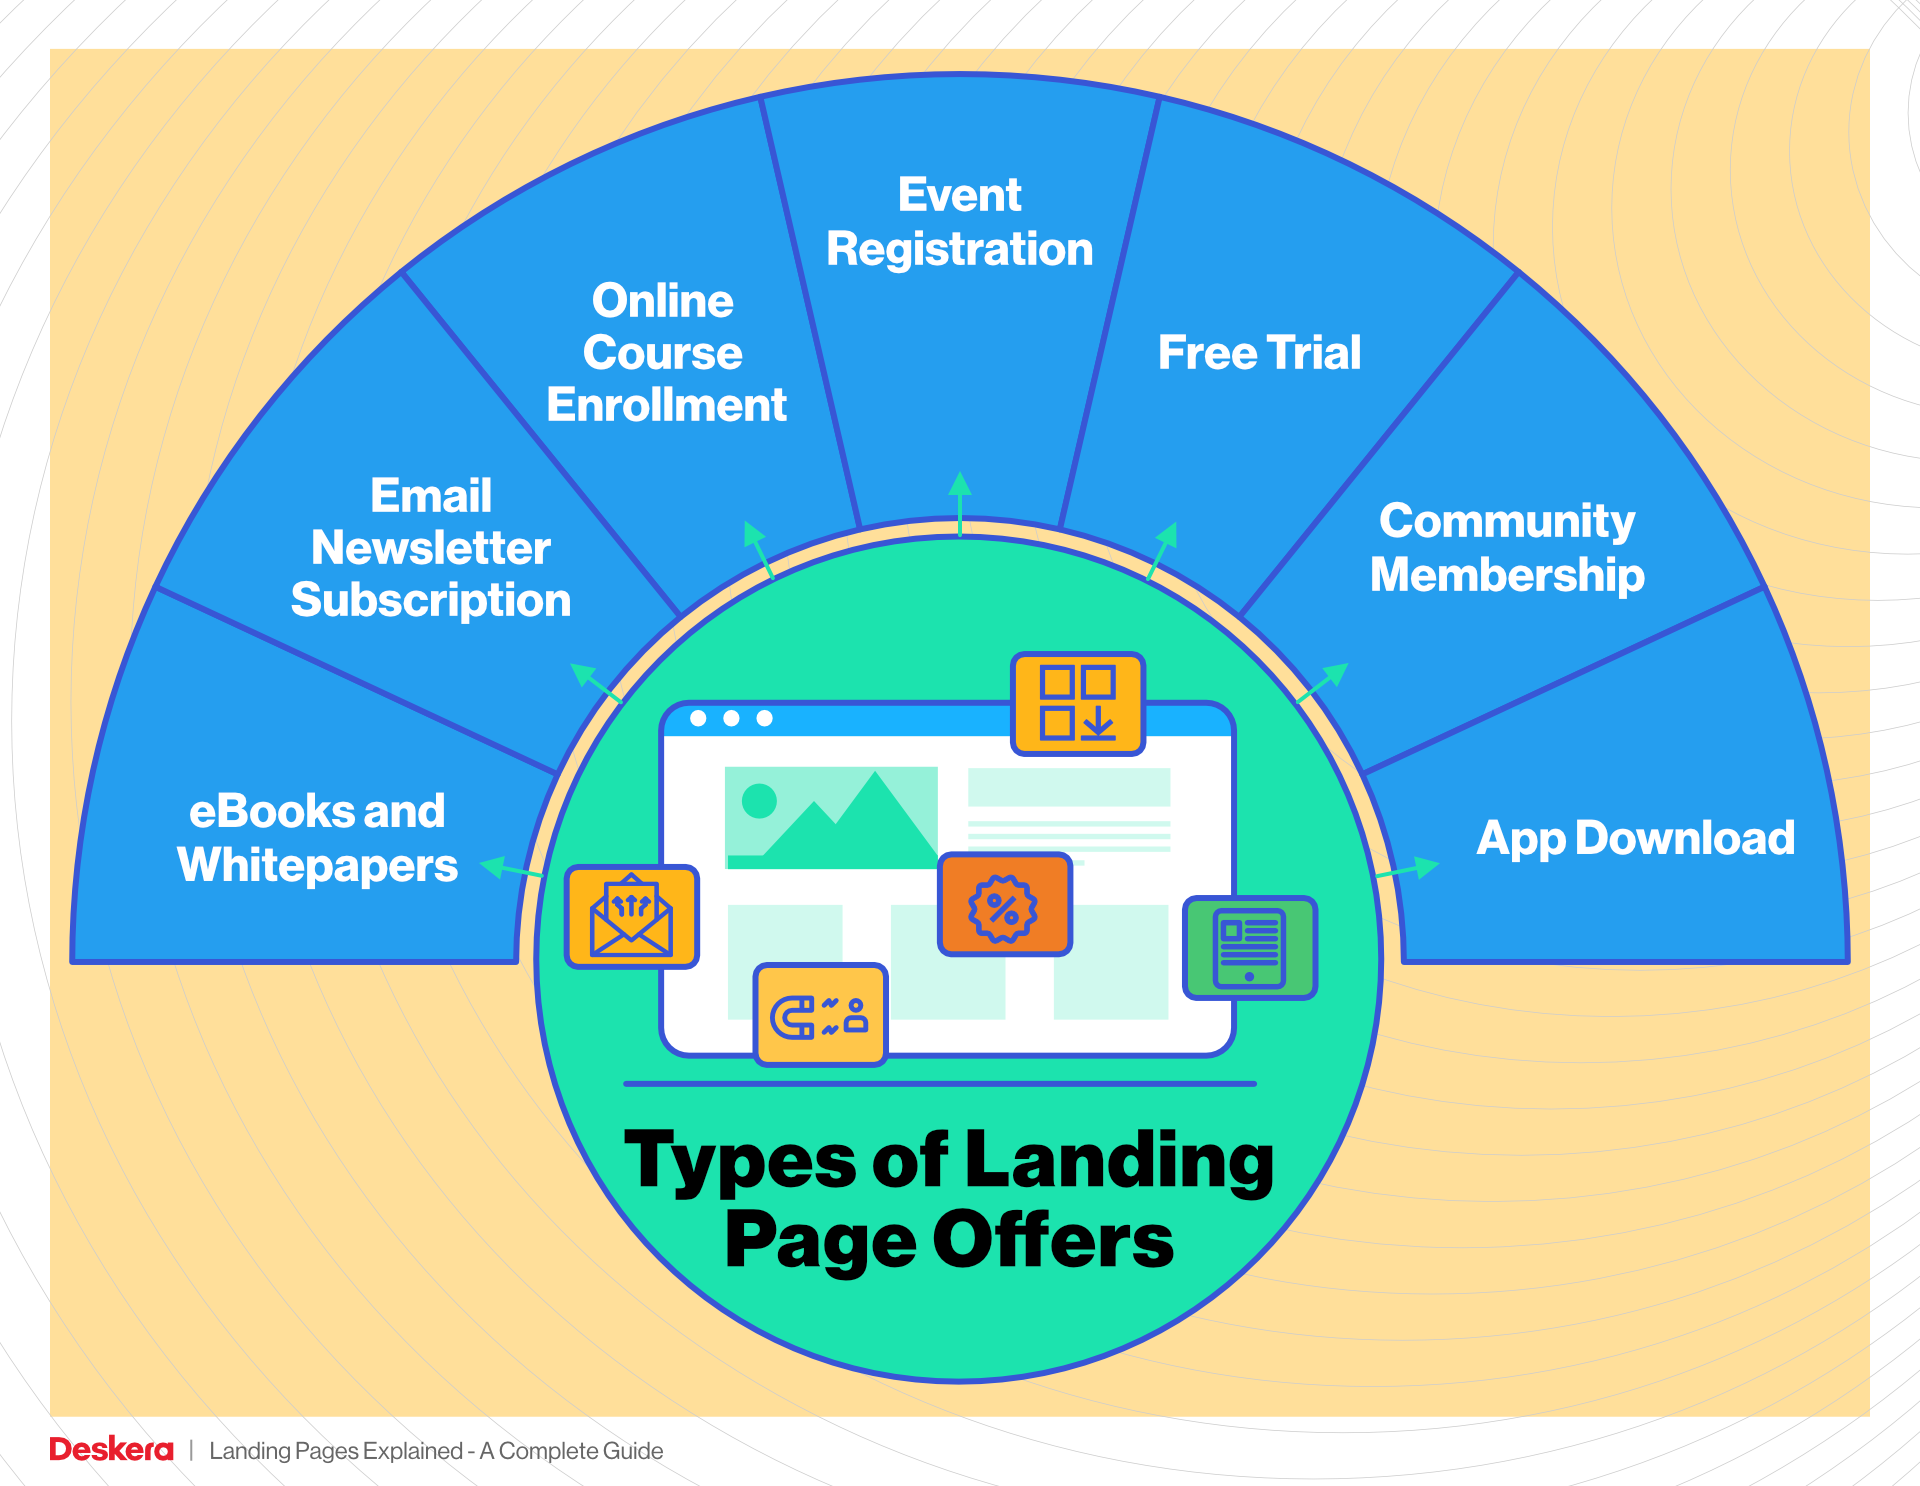 Types of Landing Page Offers